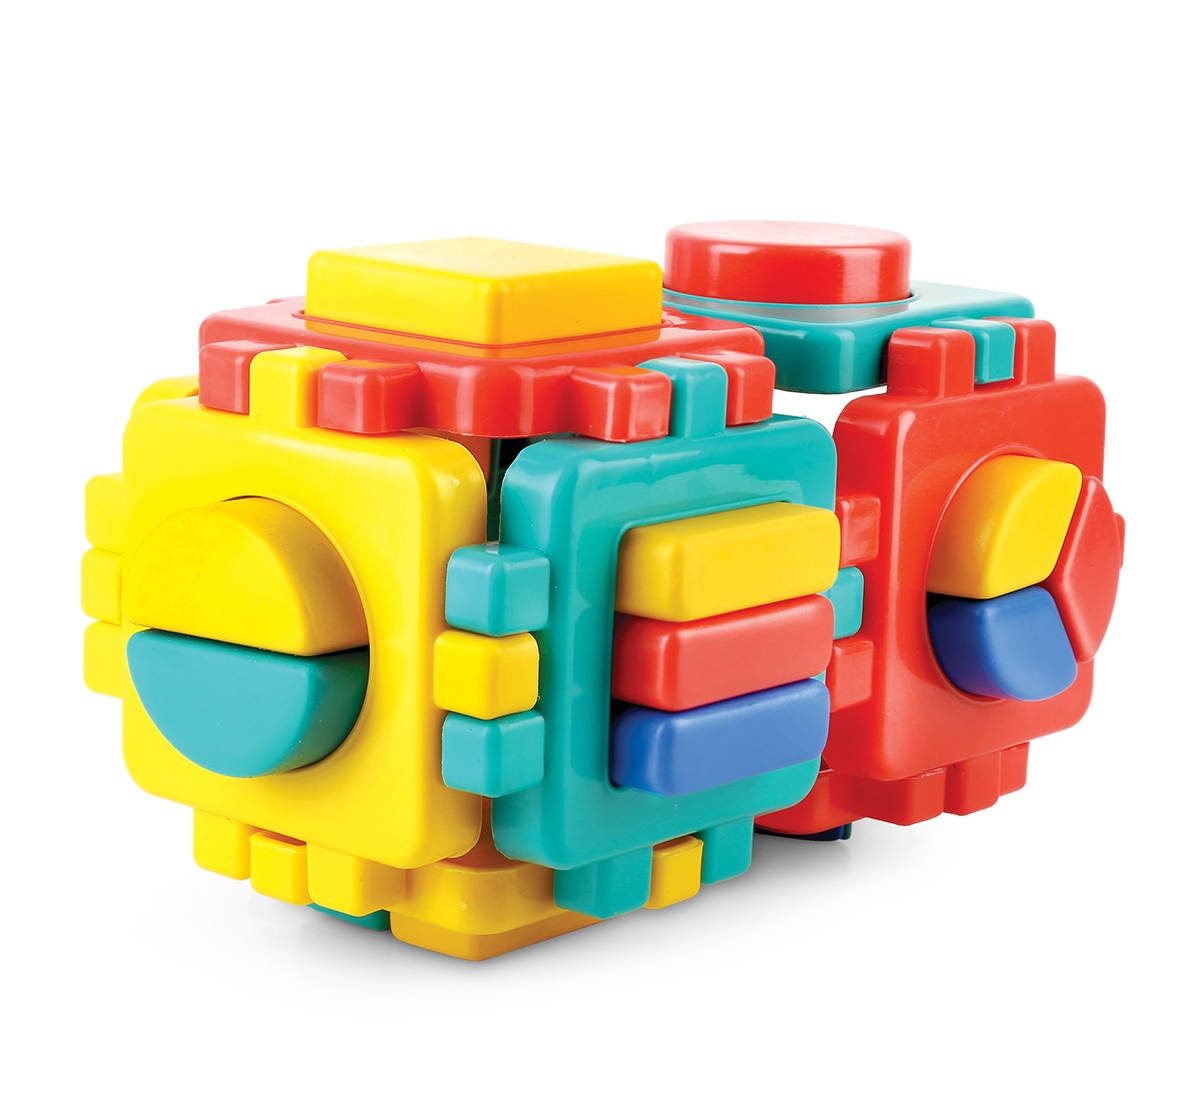 Shooting Star | Shooting star Geometrical Genious Interlocking blocks Early learning educational toy for kids Multicolor 2Y+